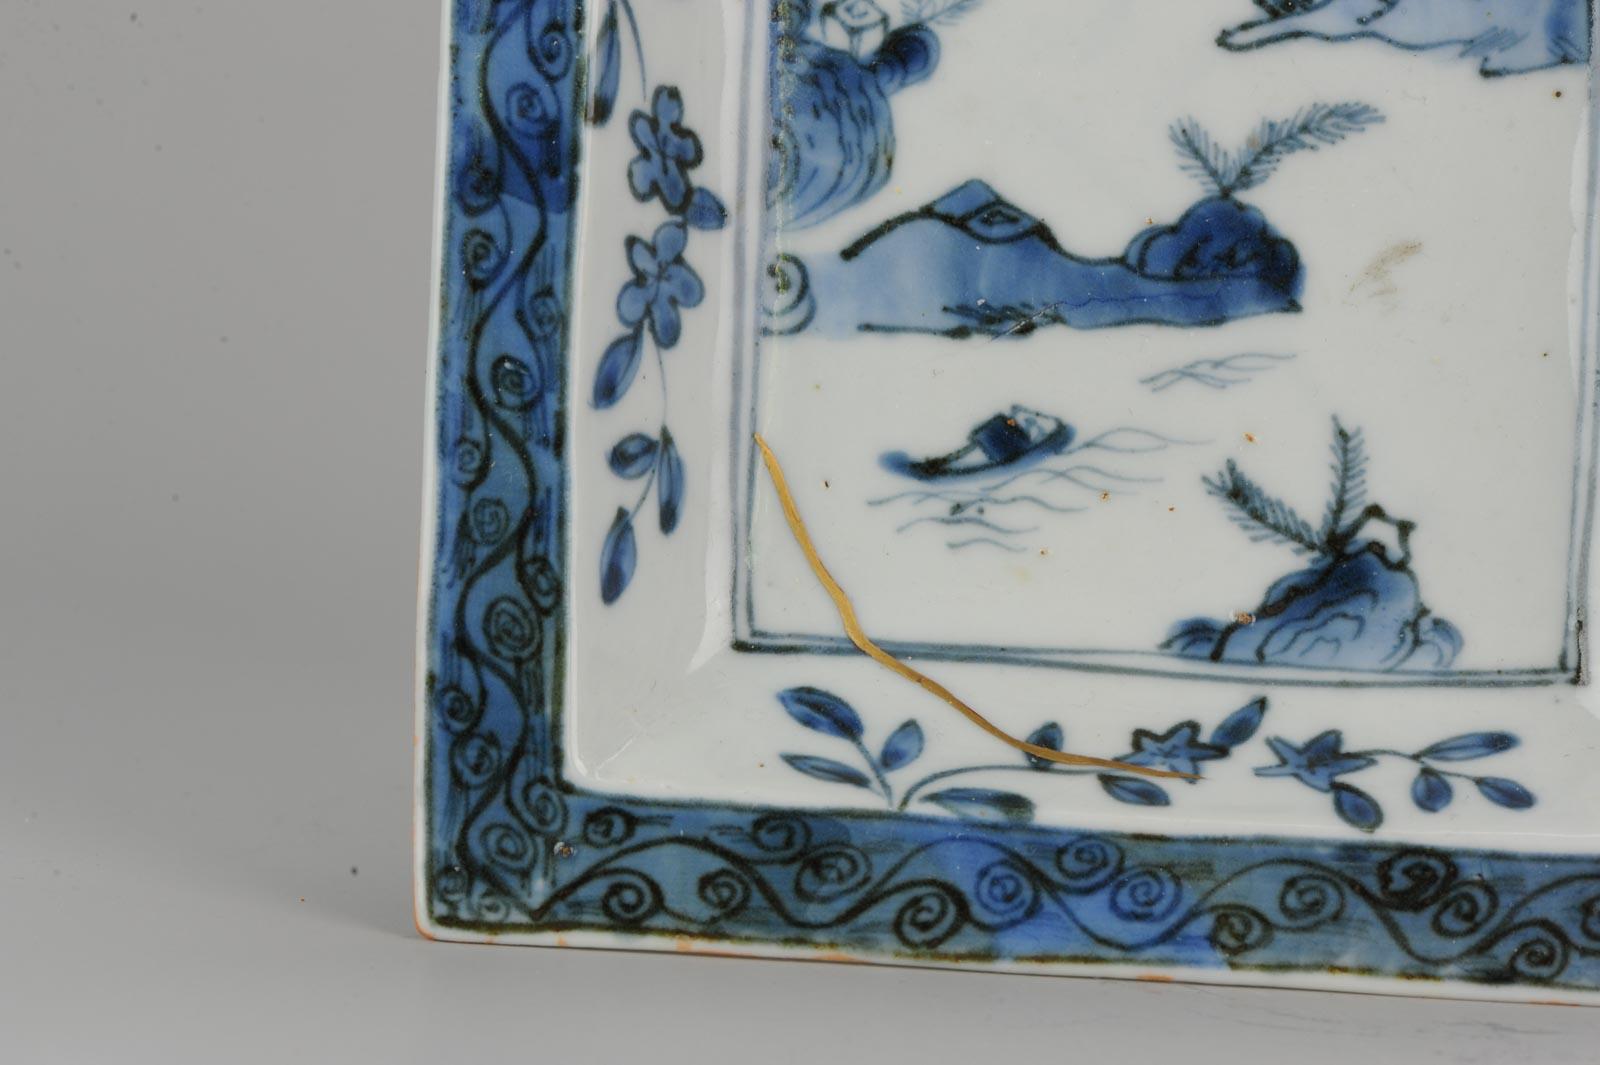 A Blue & White Ko-sometsuke plate with a landscape scene

Additional information:
Material: Porcelain & Pottery
Region of Origin: China 
Period: 17th century Ming (1368 - 1620)
Age: Pre-1800
Condition: Overall Condition Good, with a baking flaw